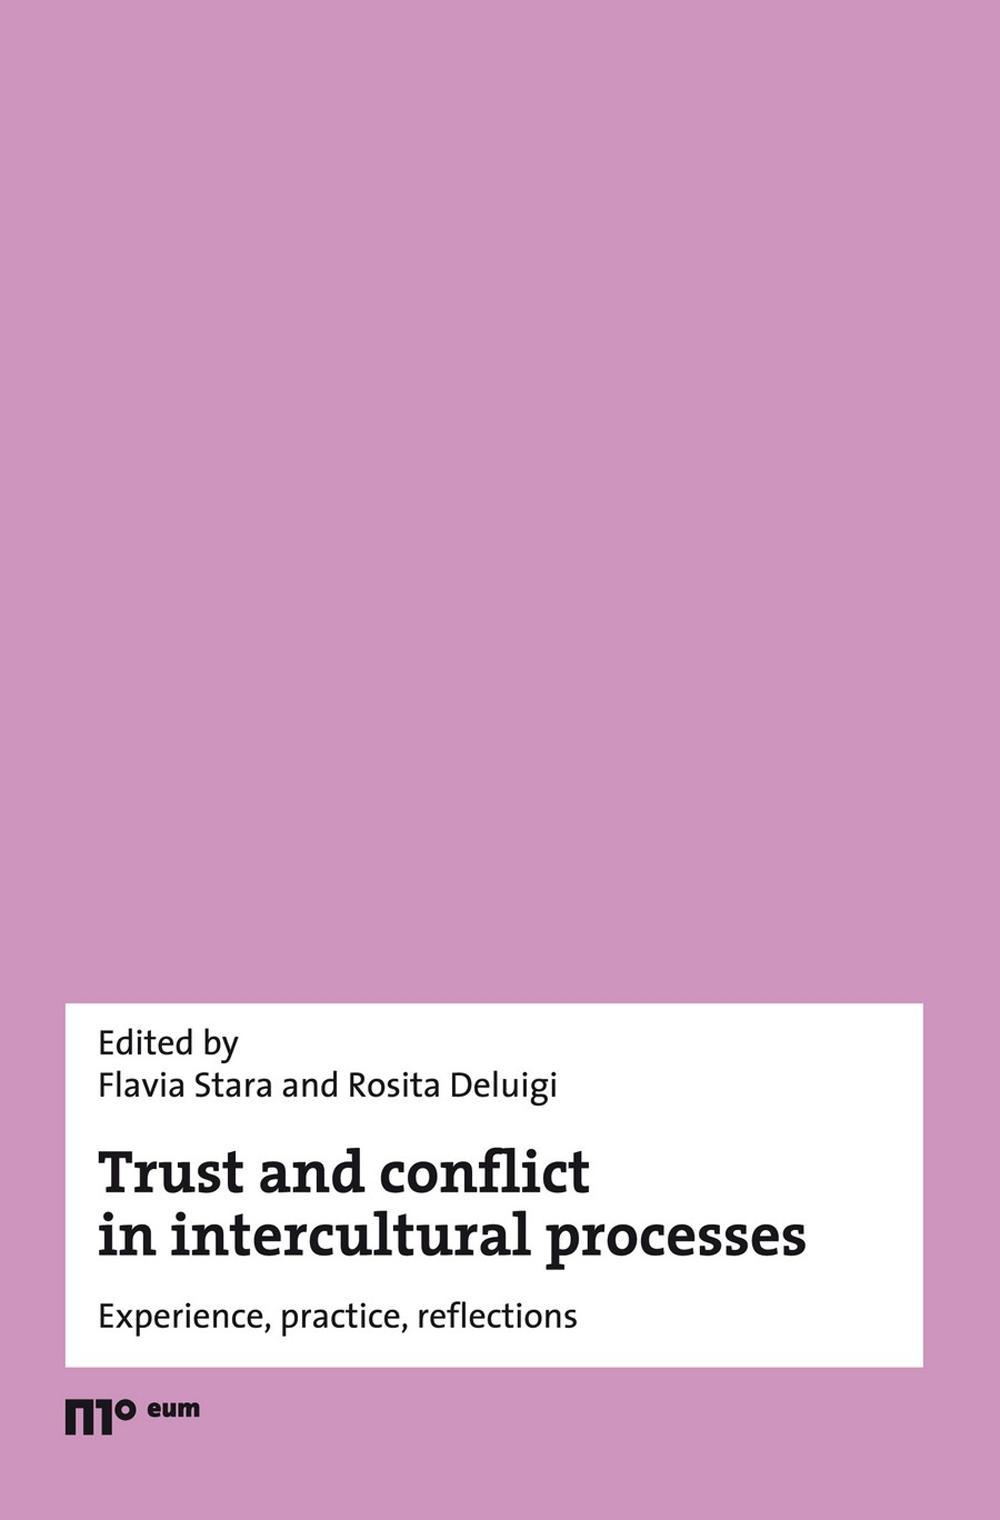 Trust and conflict in intercultural processes. Experience, practice, reflections